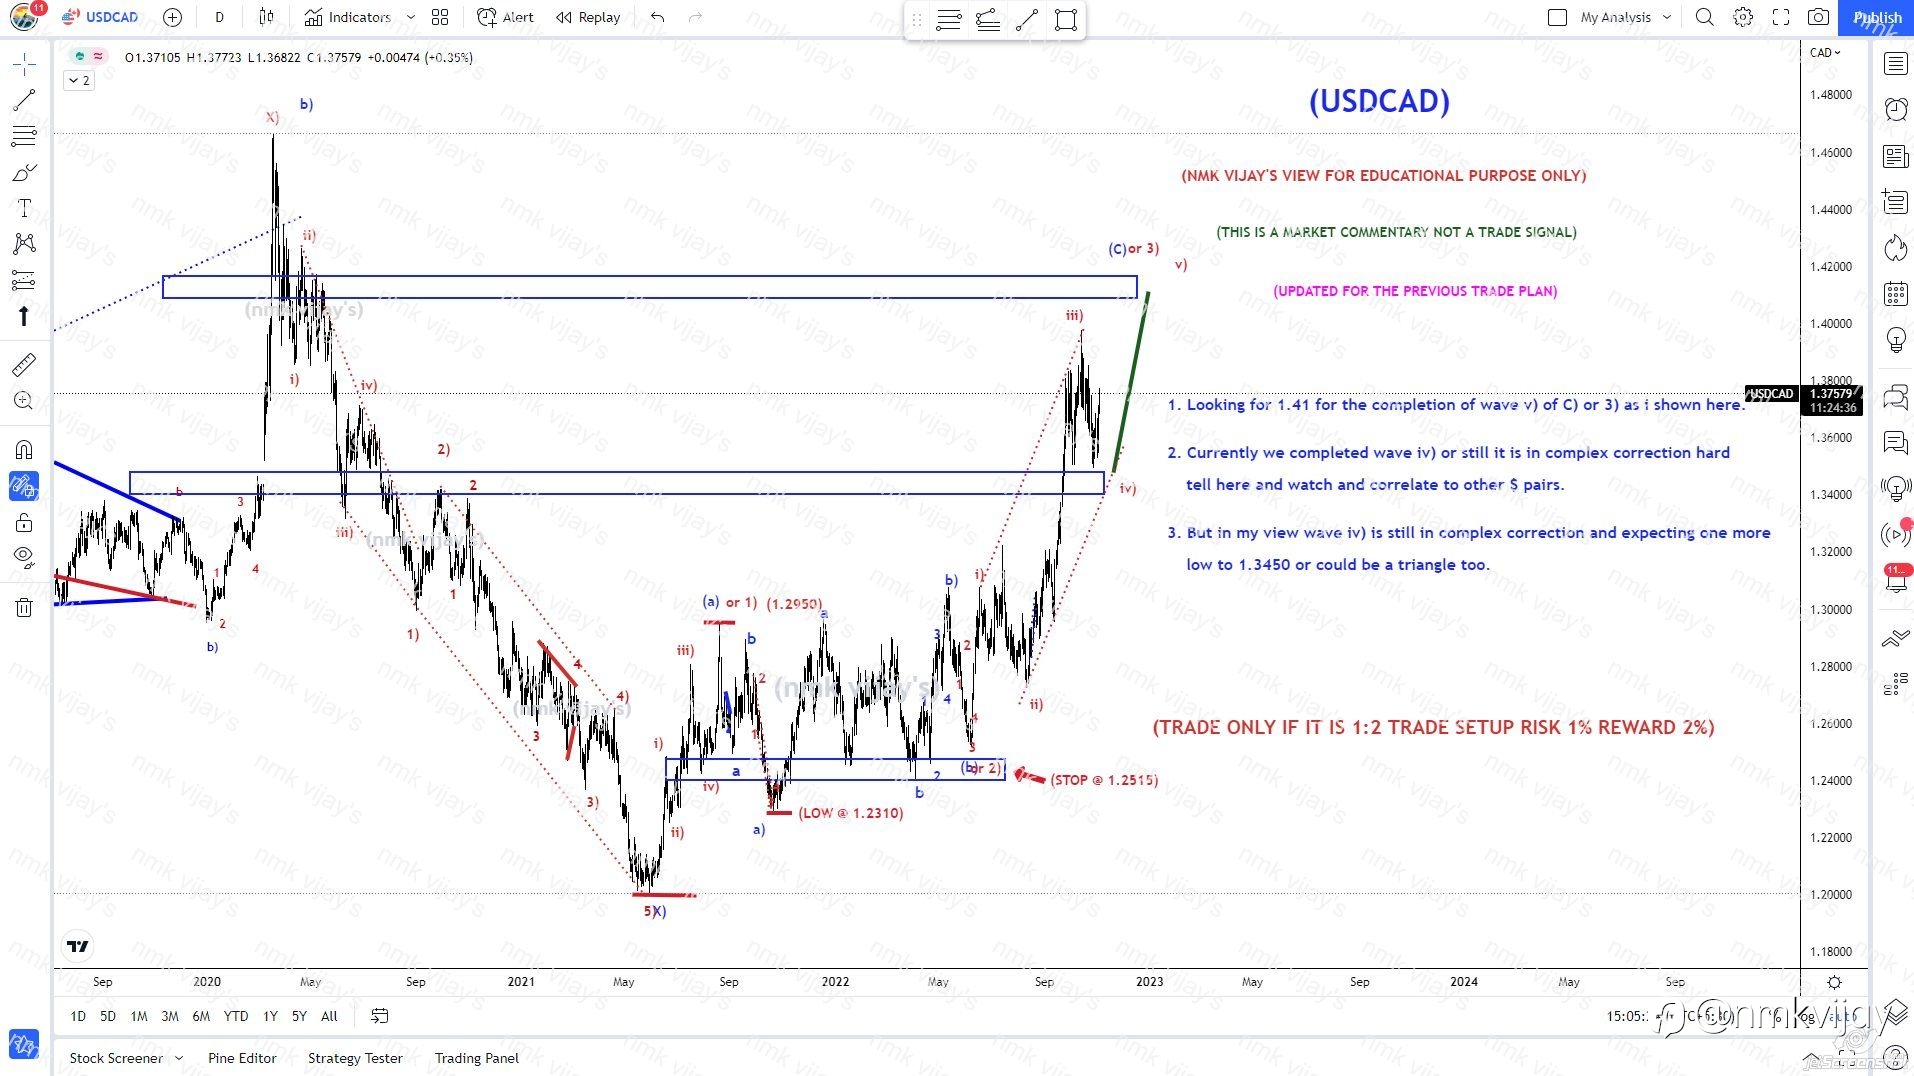 USDCAD : Still we are in wave iv) and v) to 1.41 and above ?